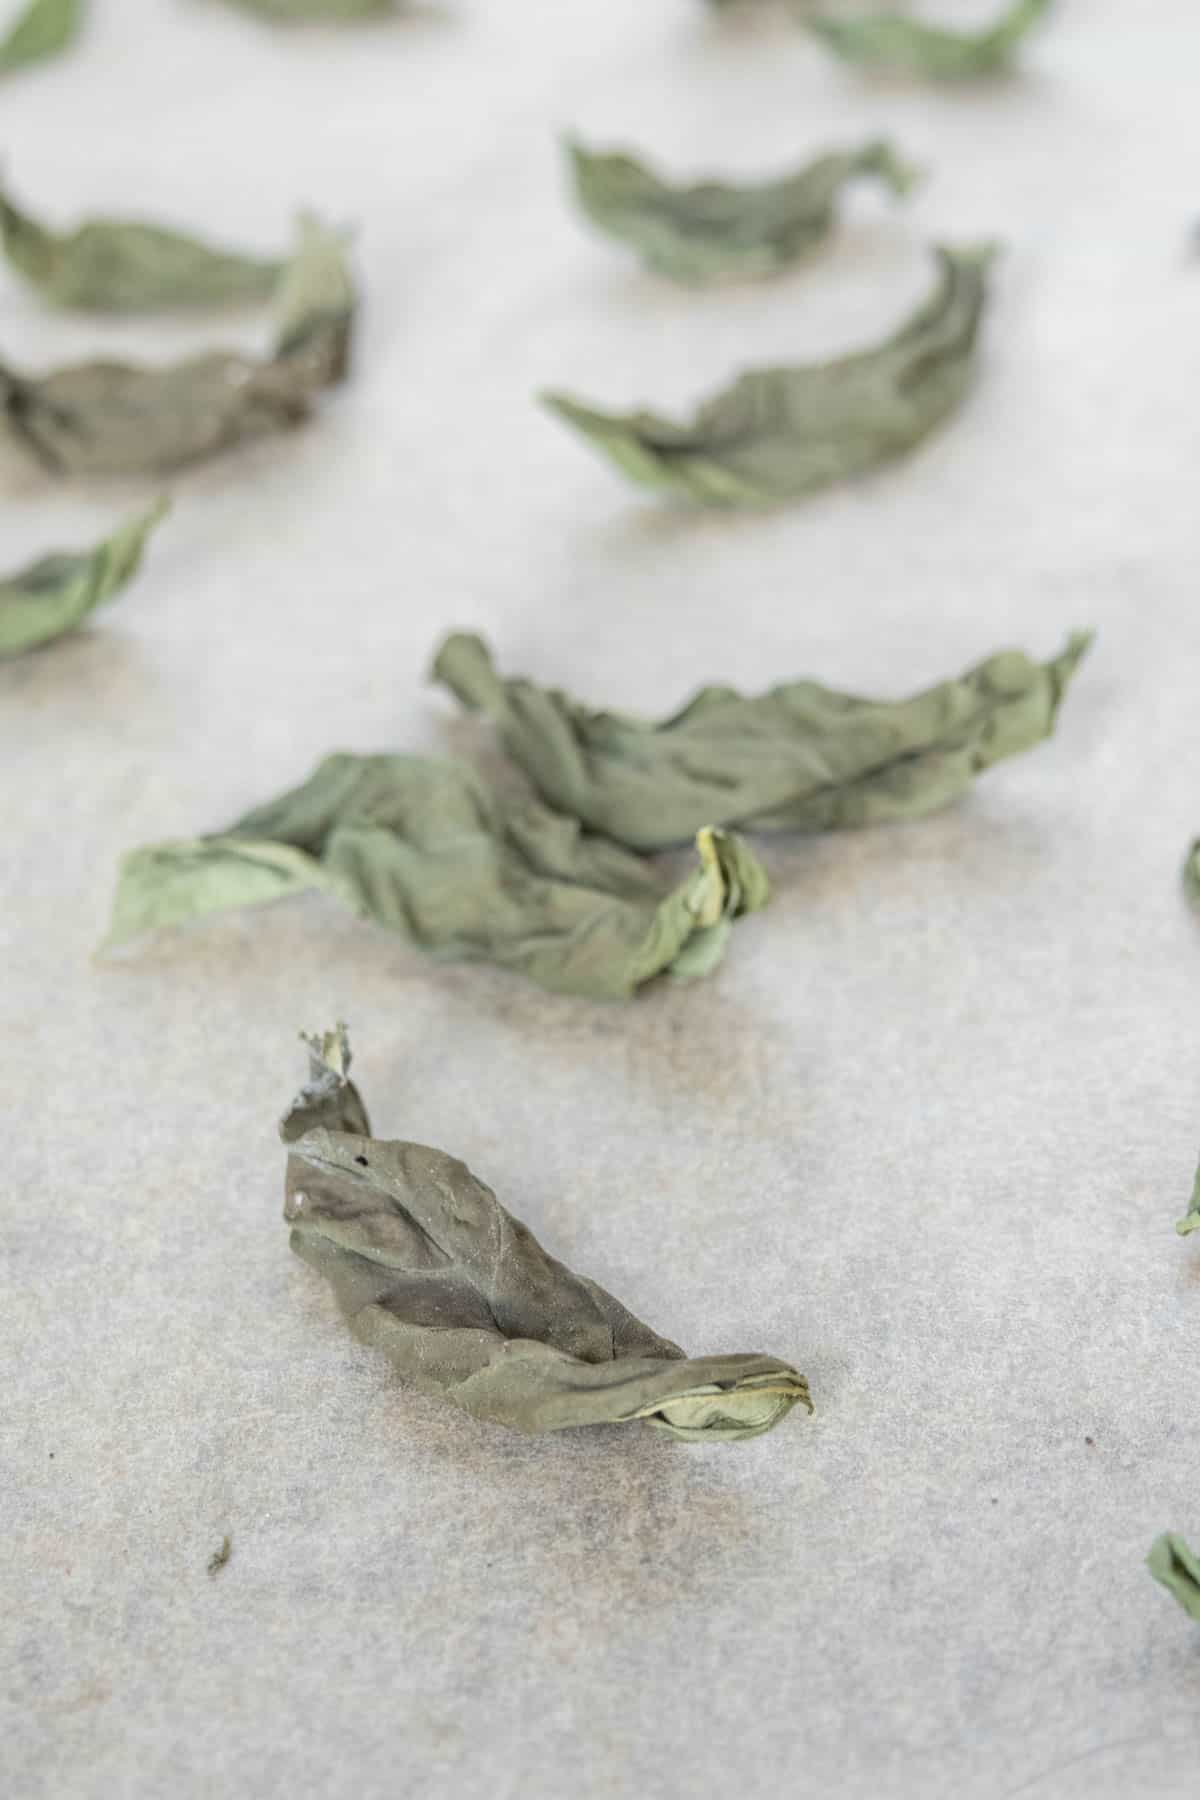 Whole dried basil leaves on parchment paper.